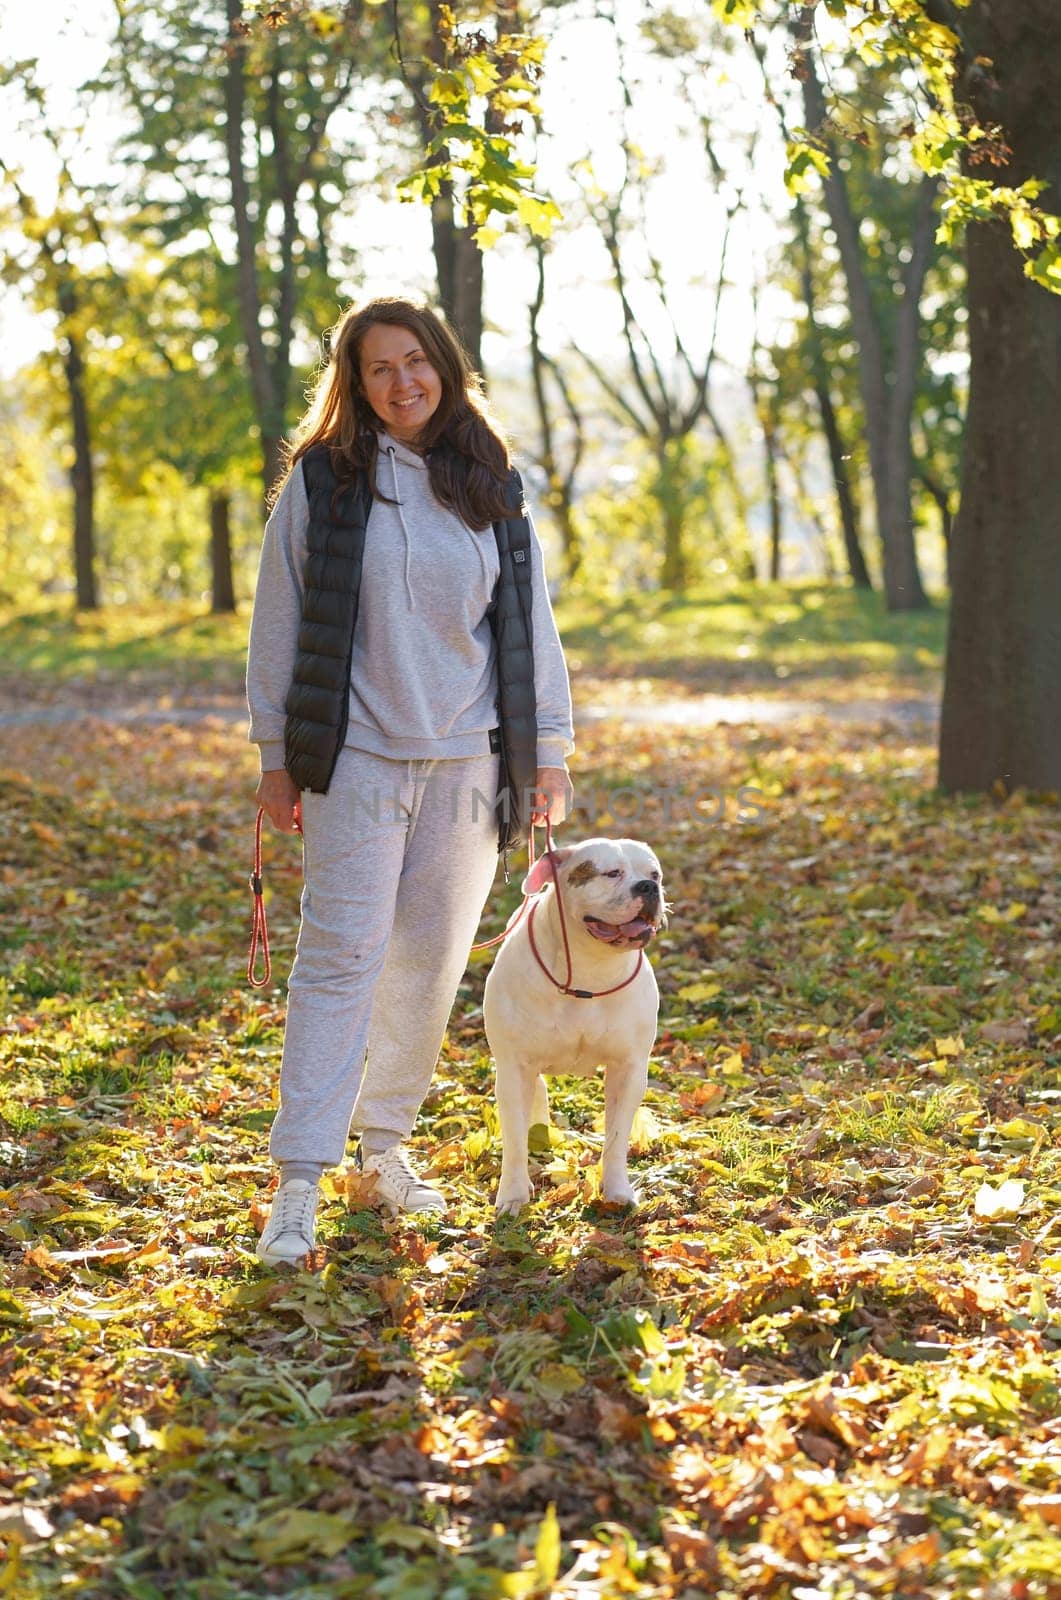 the dog plays with the mistress in the park. Close-up of a woman in a jacket and an American bulldog dog playing among the yellow autumn leaves in the park by aprilphoto